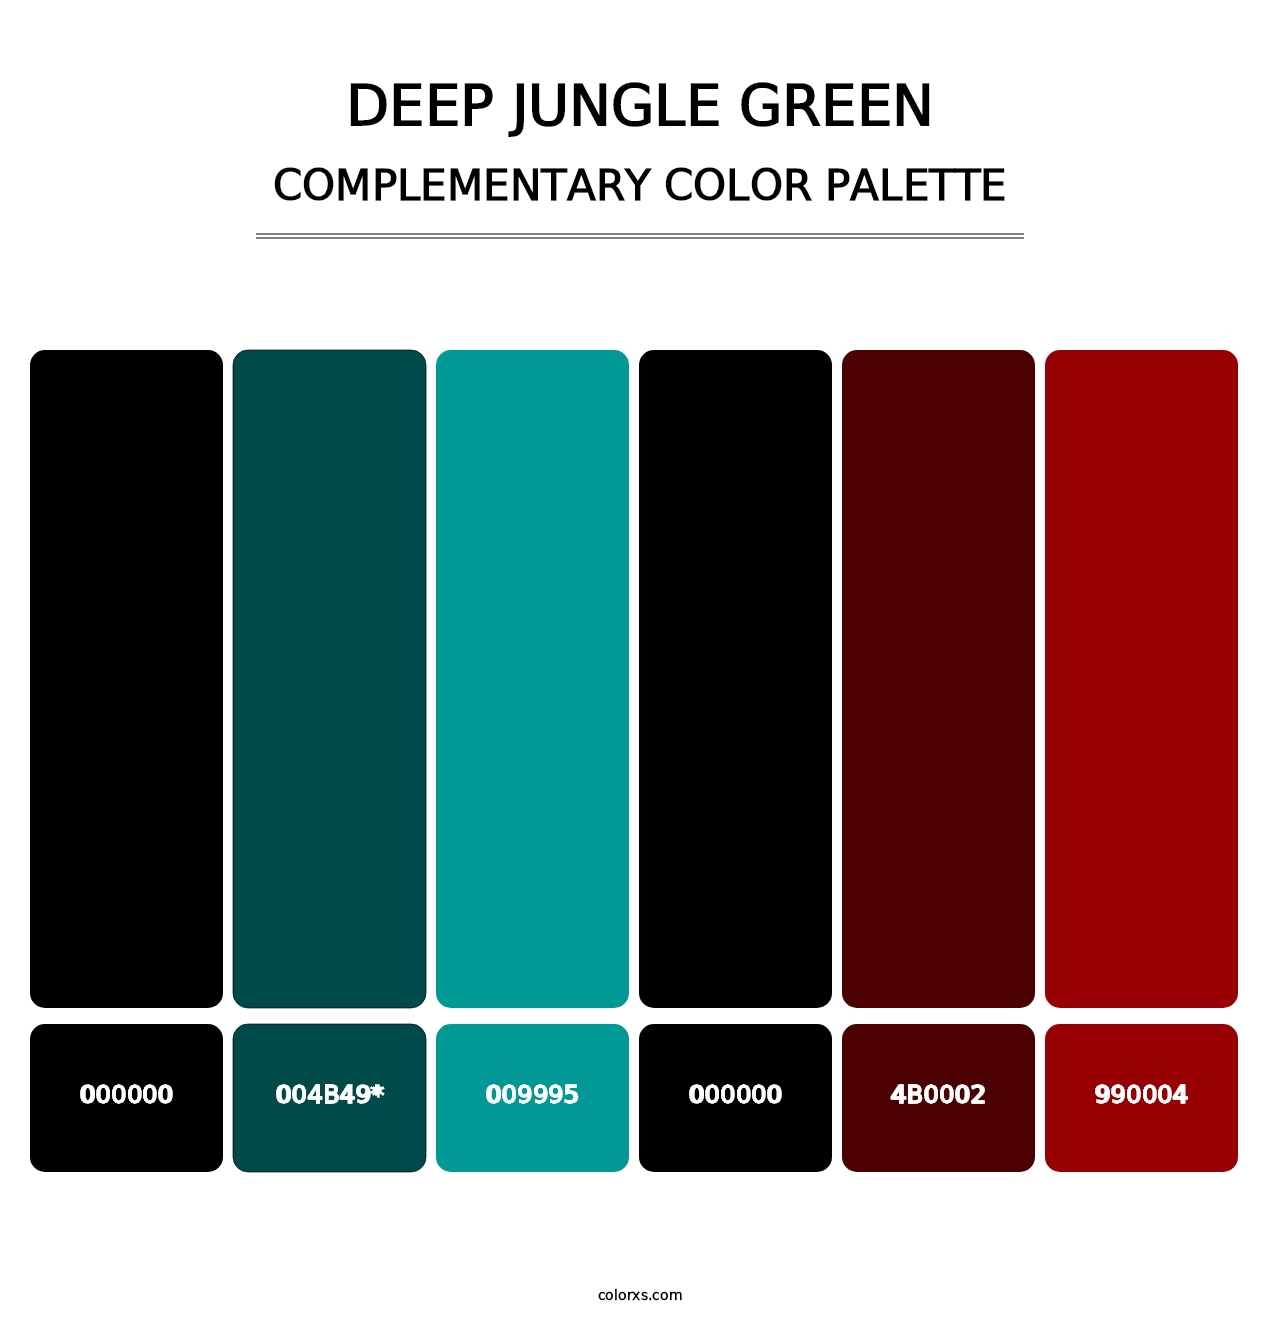 Deep Jungle Green - Complementary Color Palette